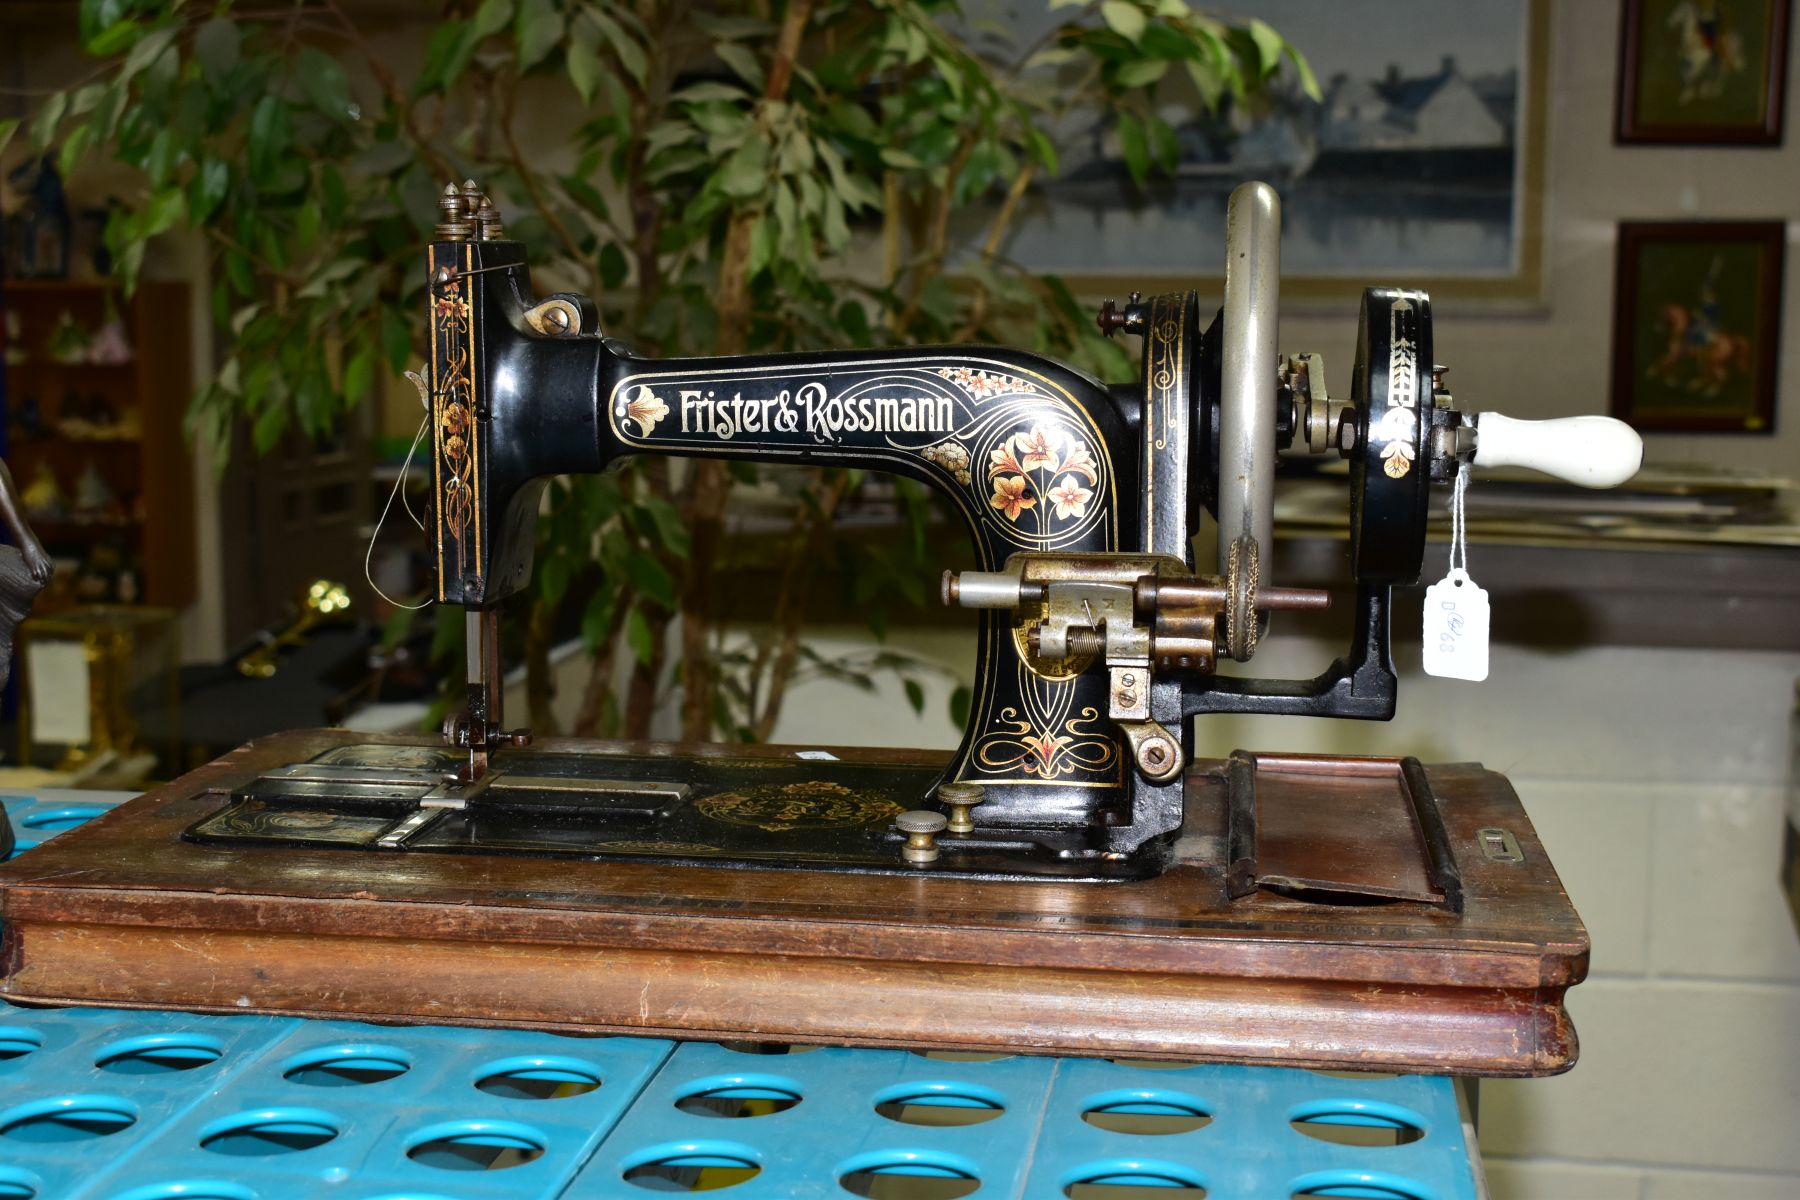 A FRISTER & ROSSMAN CAST IRON SEWING MACHINE, machine and floral decoration in fairly good - Image 4 of 5